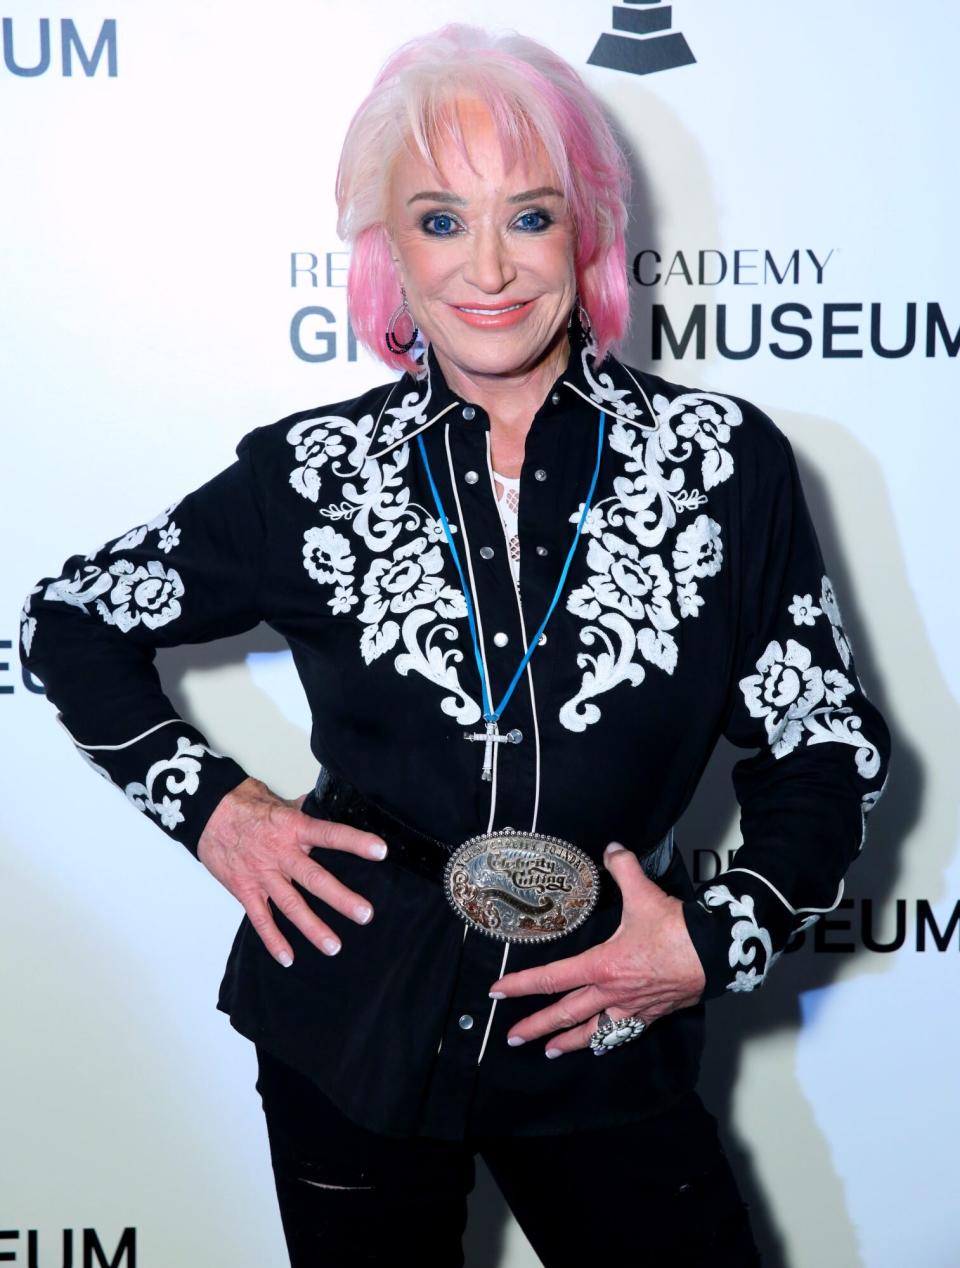 LOS ANGELES, CALIFORNIA - OCTOBER 03: Tanya Tucker attends The Drop: Tanya Tucker at the GRAMMY Museum on October 03, 2019 in Los Angeles, California. (Photo by Rebecca Sapp/Getty Images for The Recording Academy )